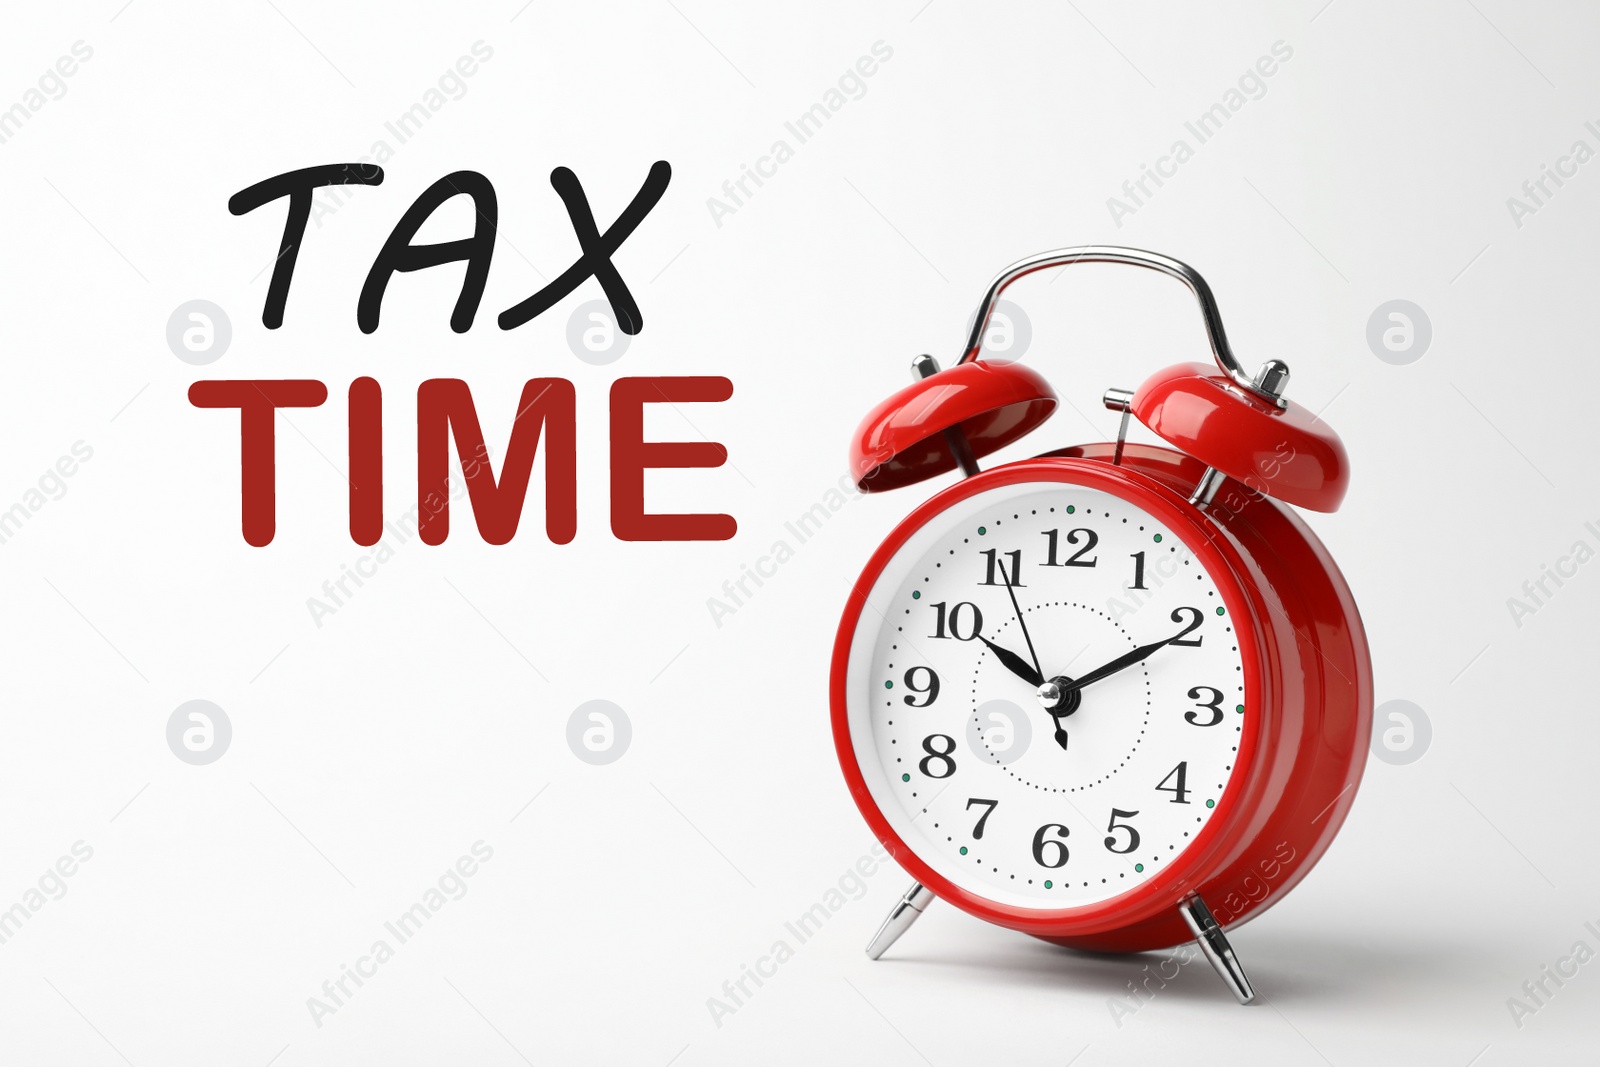 Image of Time to pay taxes. Alarm clock on white background